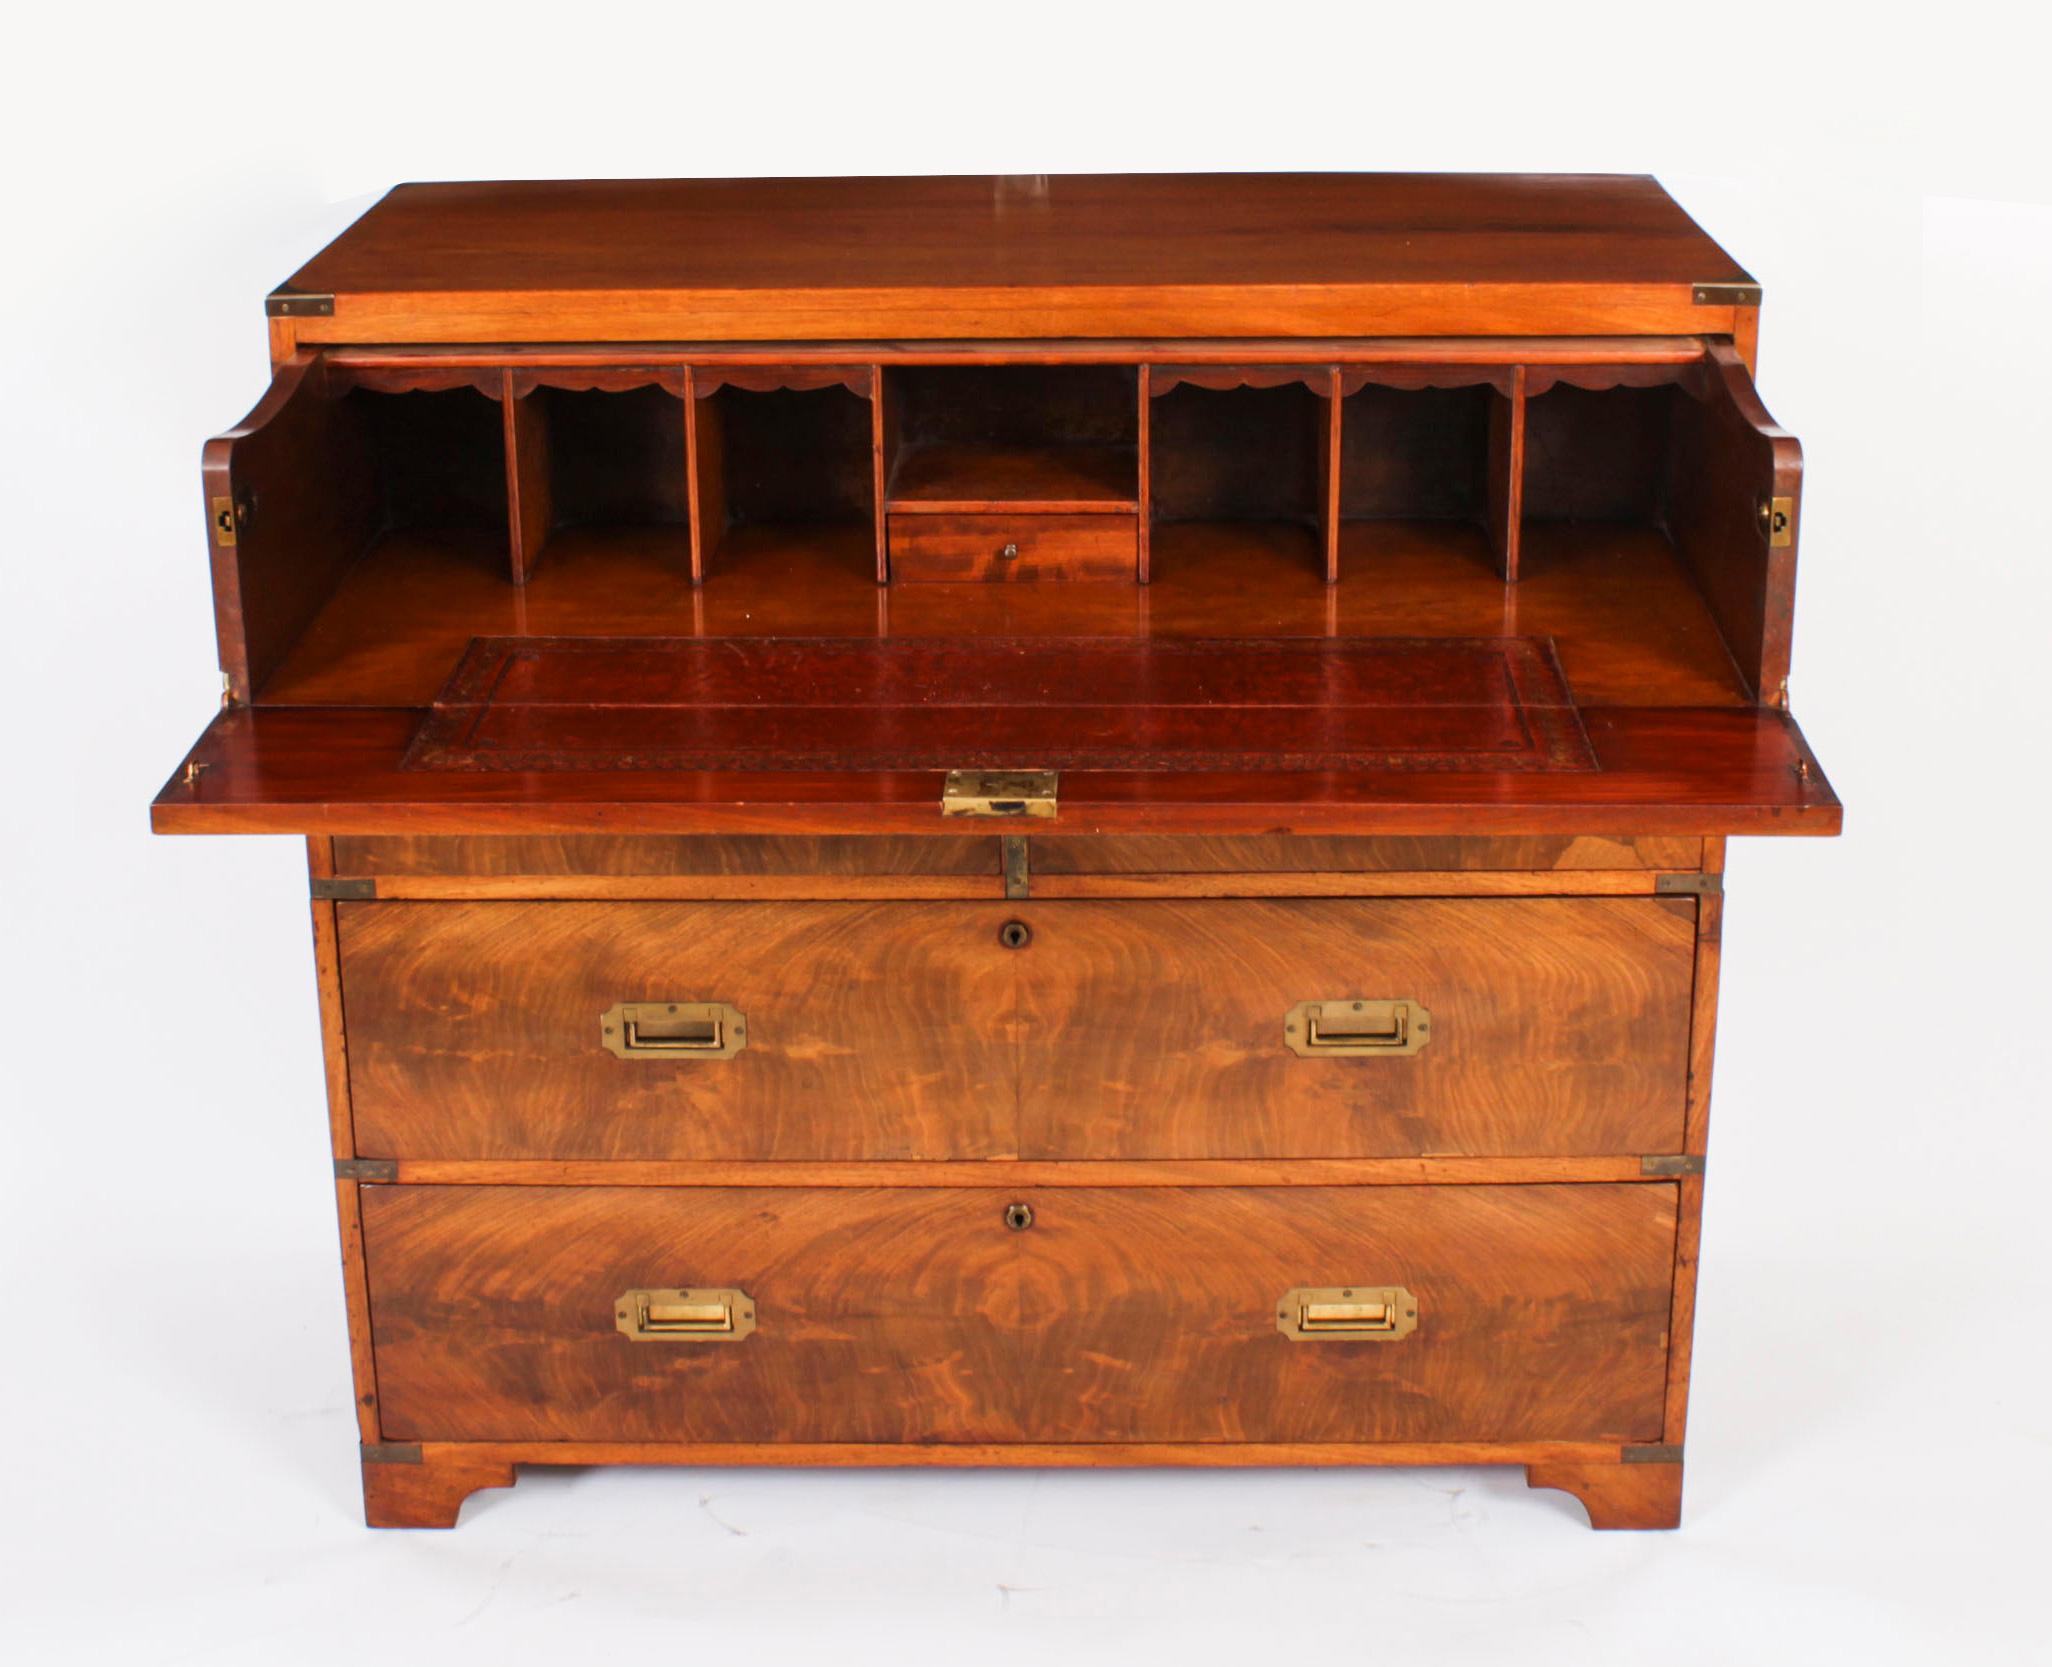 This is beautifully crafted antique early Victorian teak military campaign secretaire chest of drawers dates from Circa 1840.

The top drawer opening to a pull out secretaire fitted with a small drawer, pigeon hole compartments and an inset gold